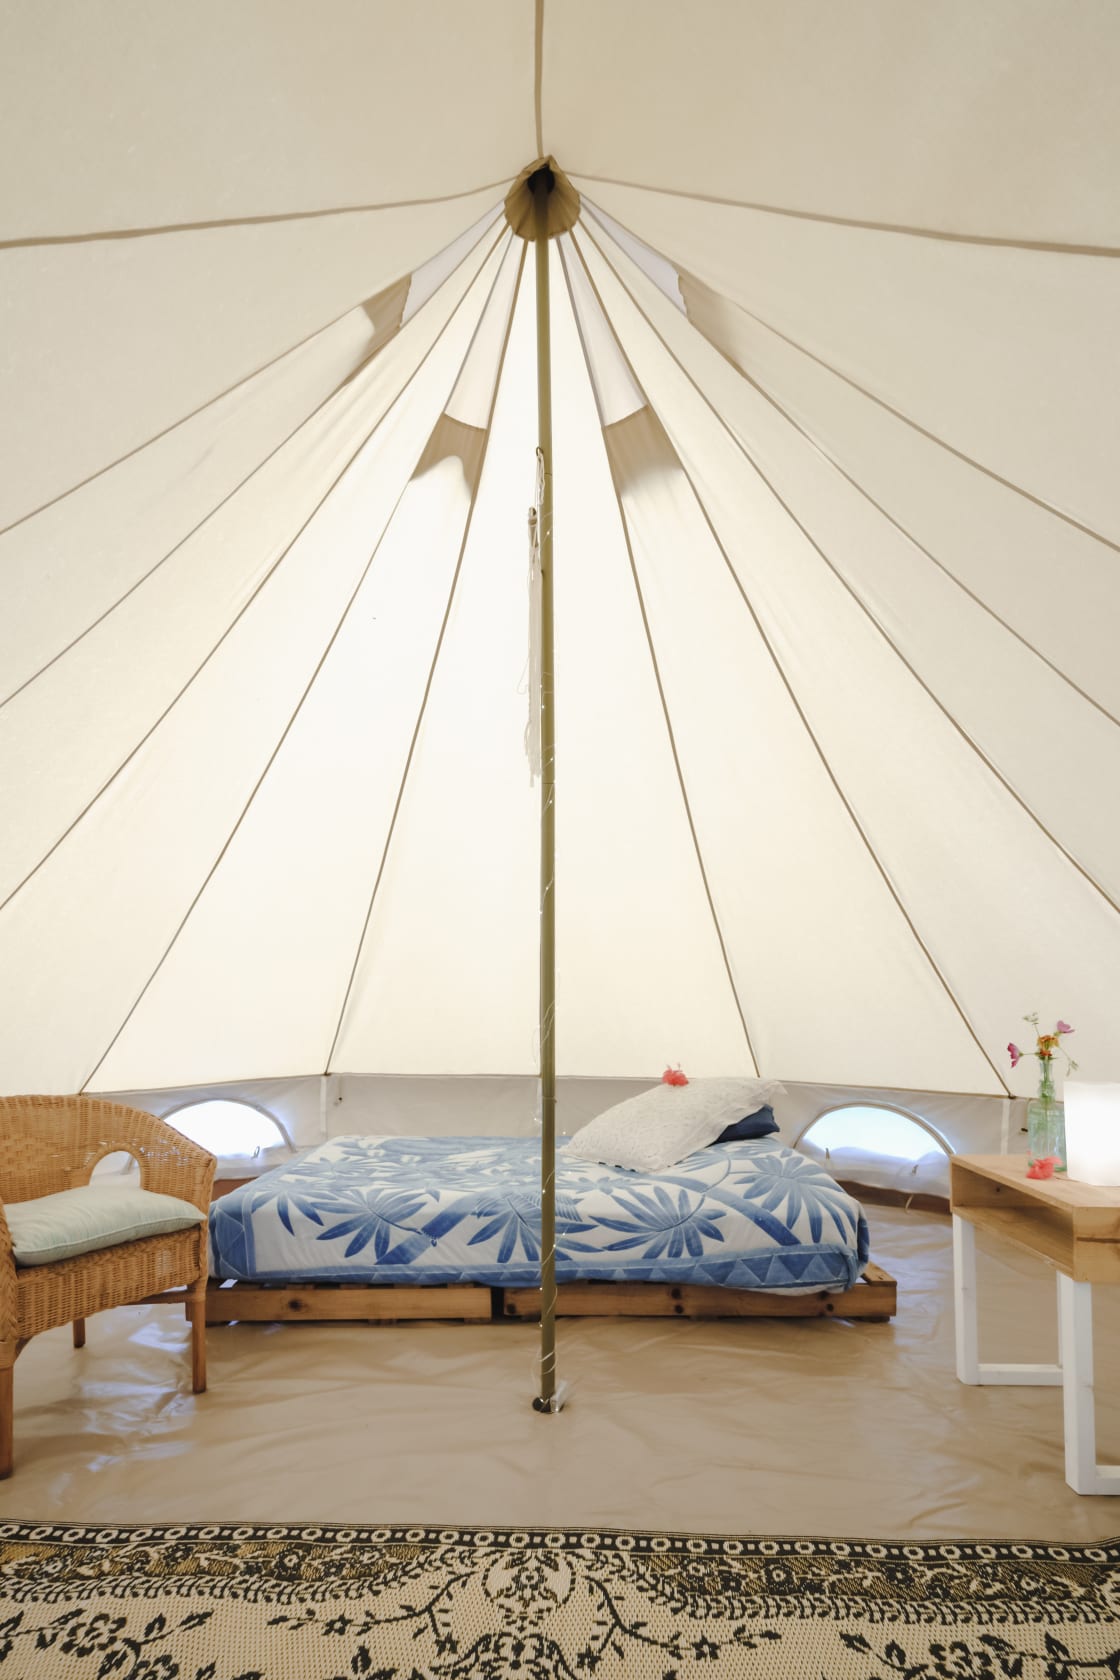 Inside our 5m Belle tents, comfy and stylish with fully zipable sides for those hot nights